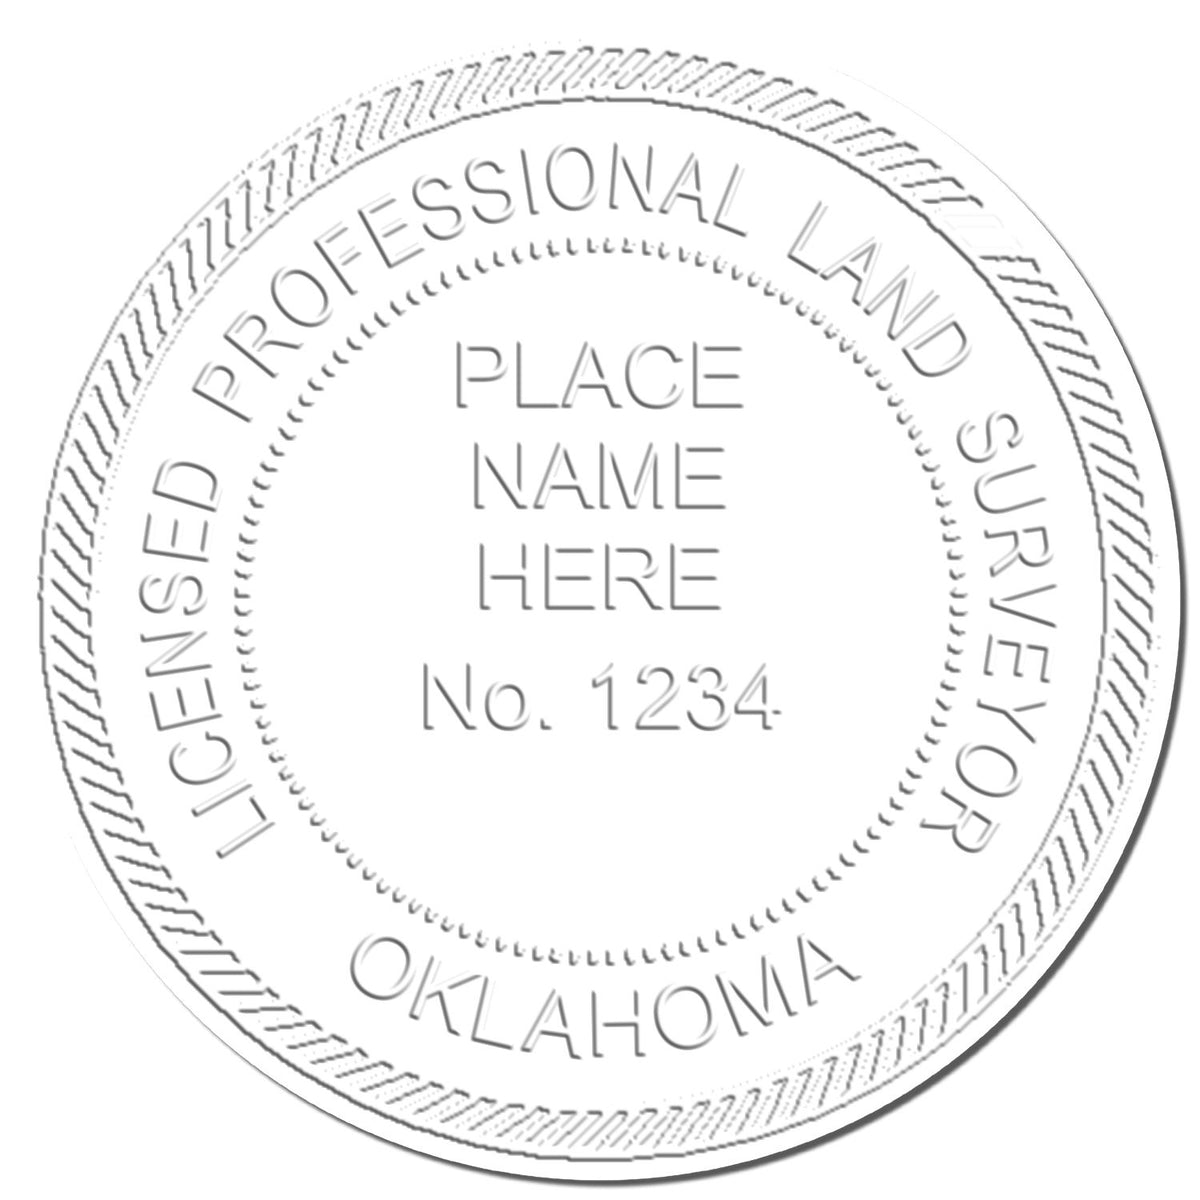 This paper is stamped with a sample imprint of the Gift Oklahoma Land Surveyor Seal, signifying its quality and reliability.